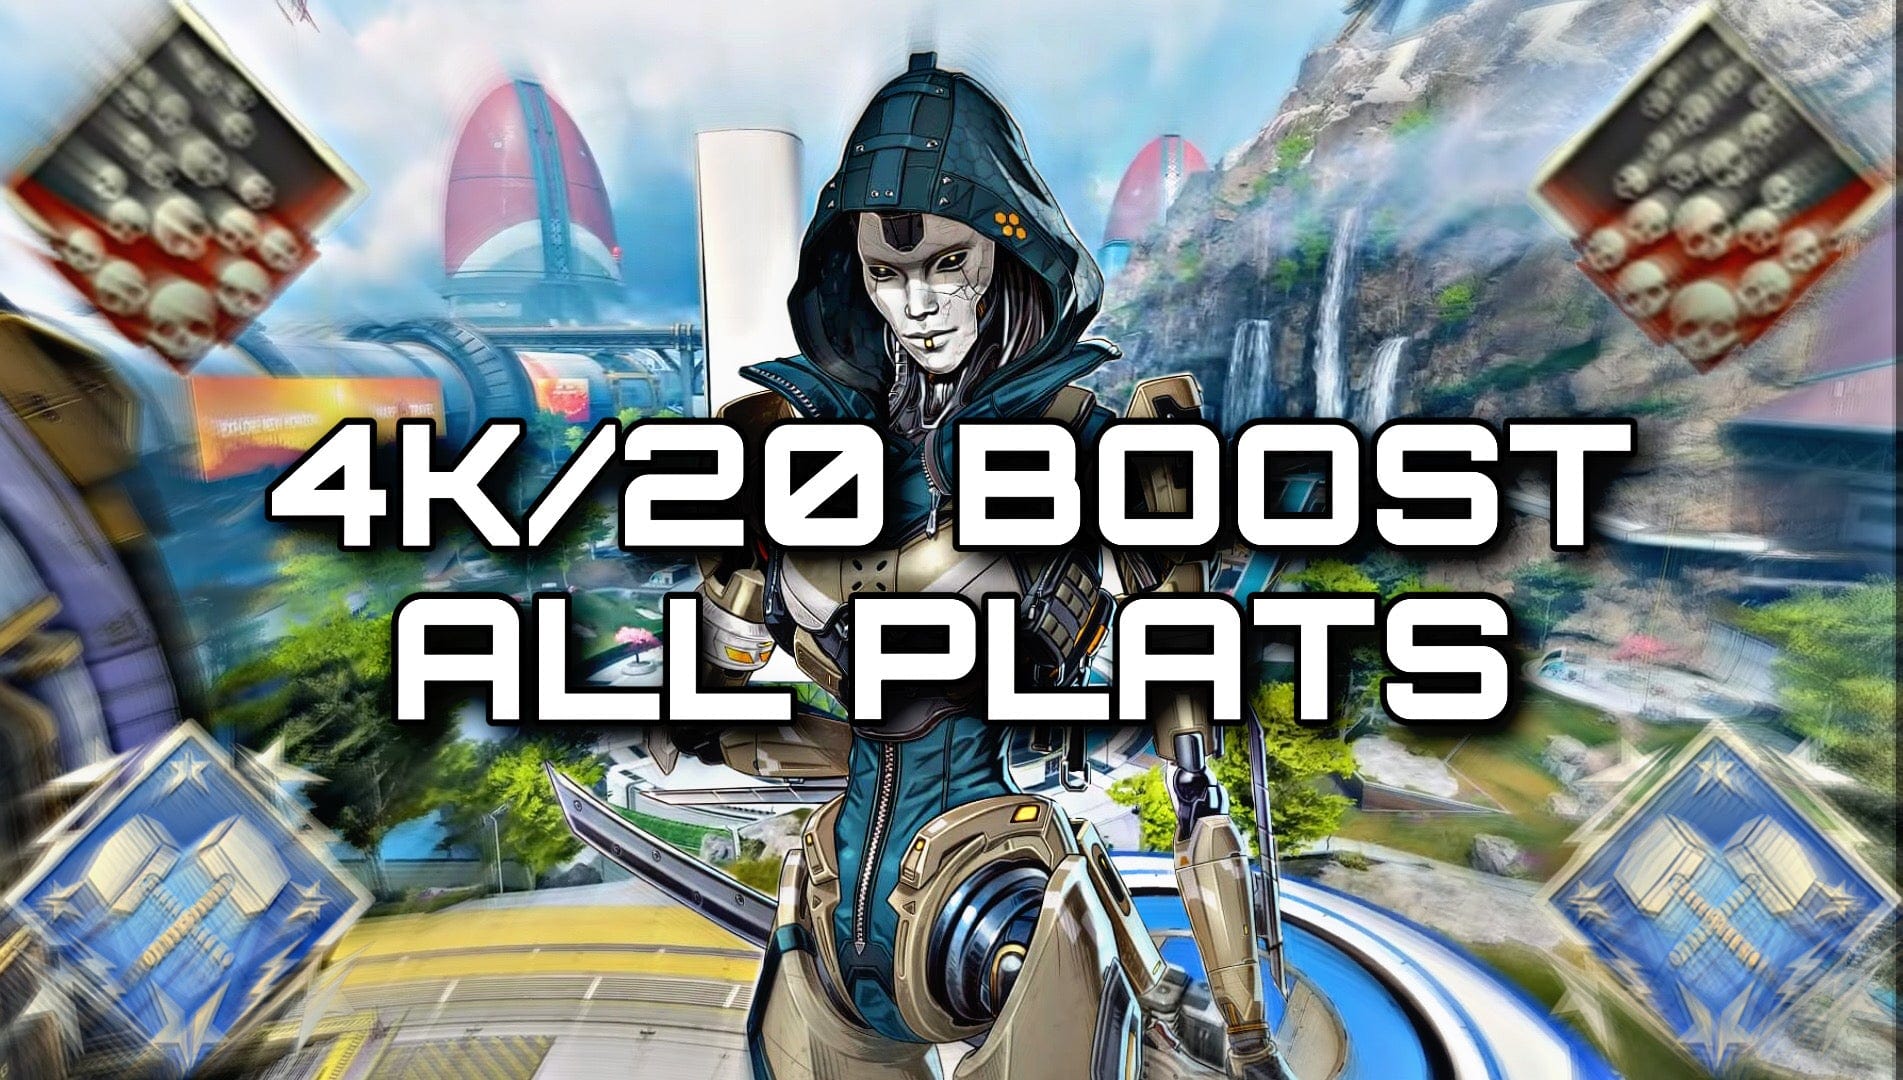 CZA 4K/20 BOOST ALL PLATFORMS AVAILABLE